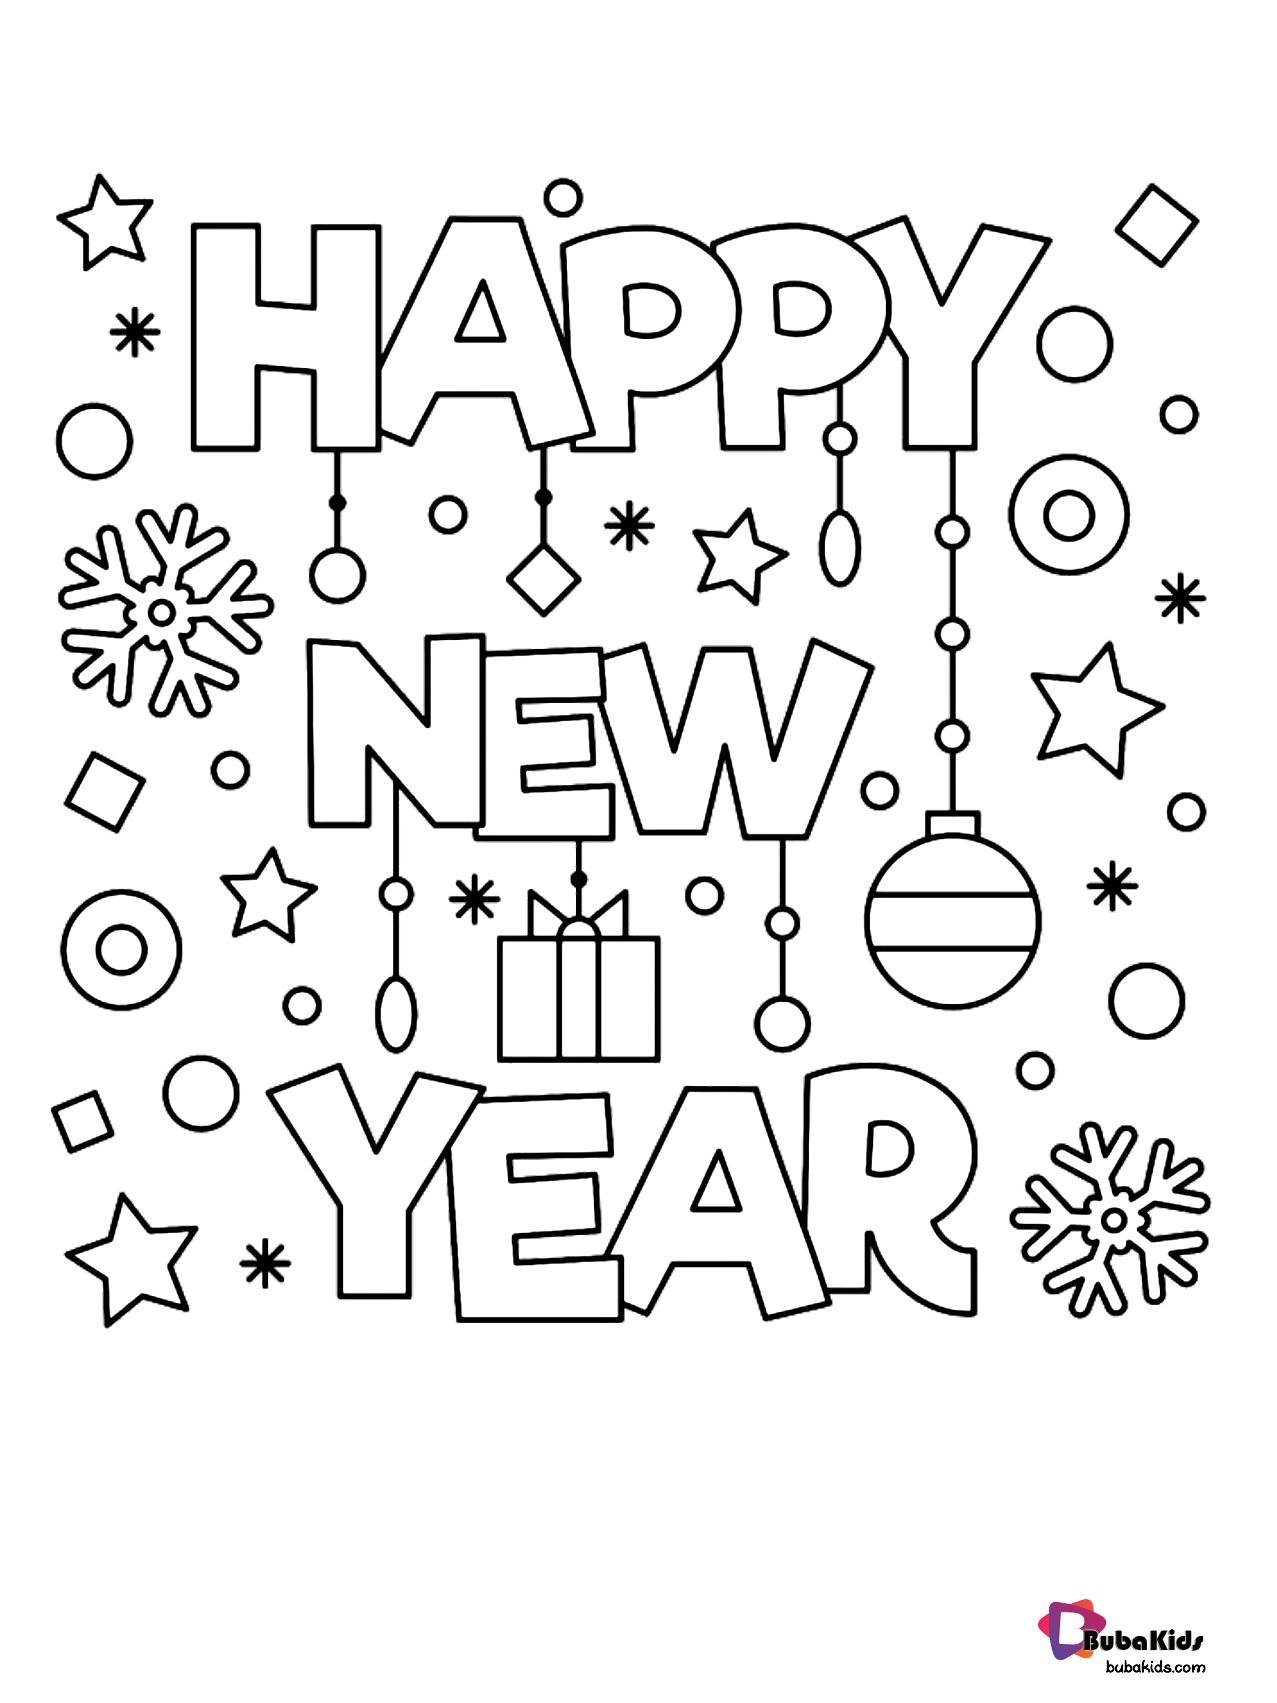 Happy New Year coloring page. Wallpaper